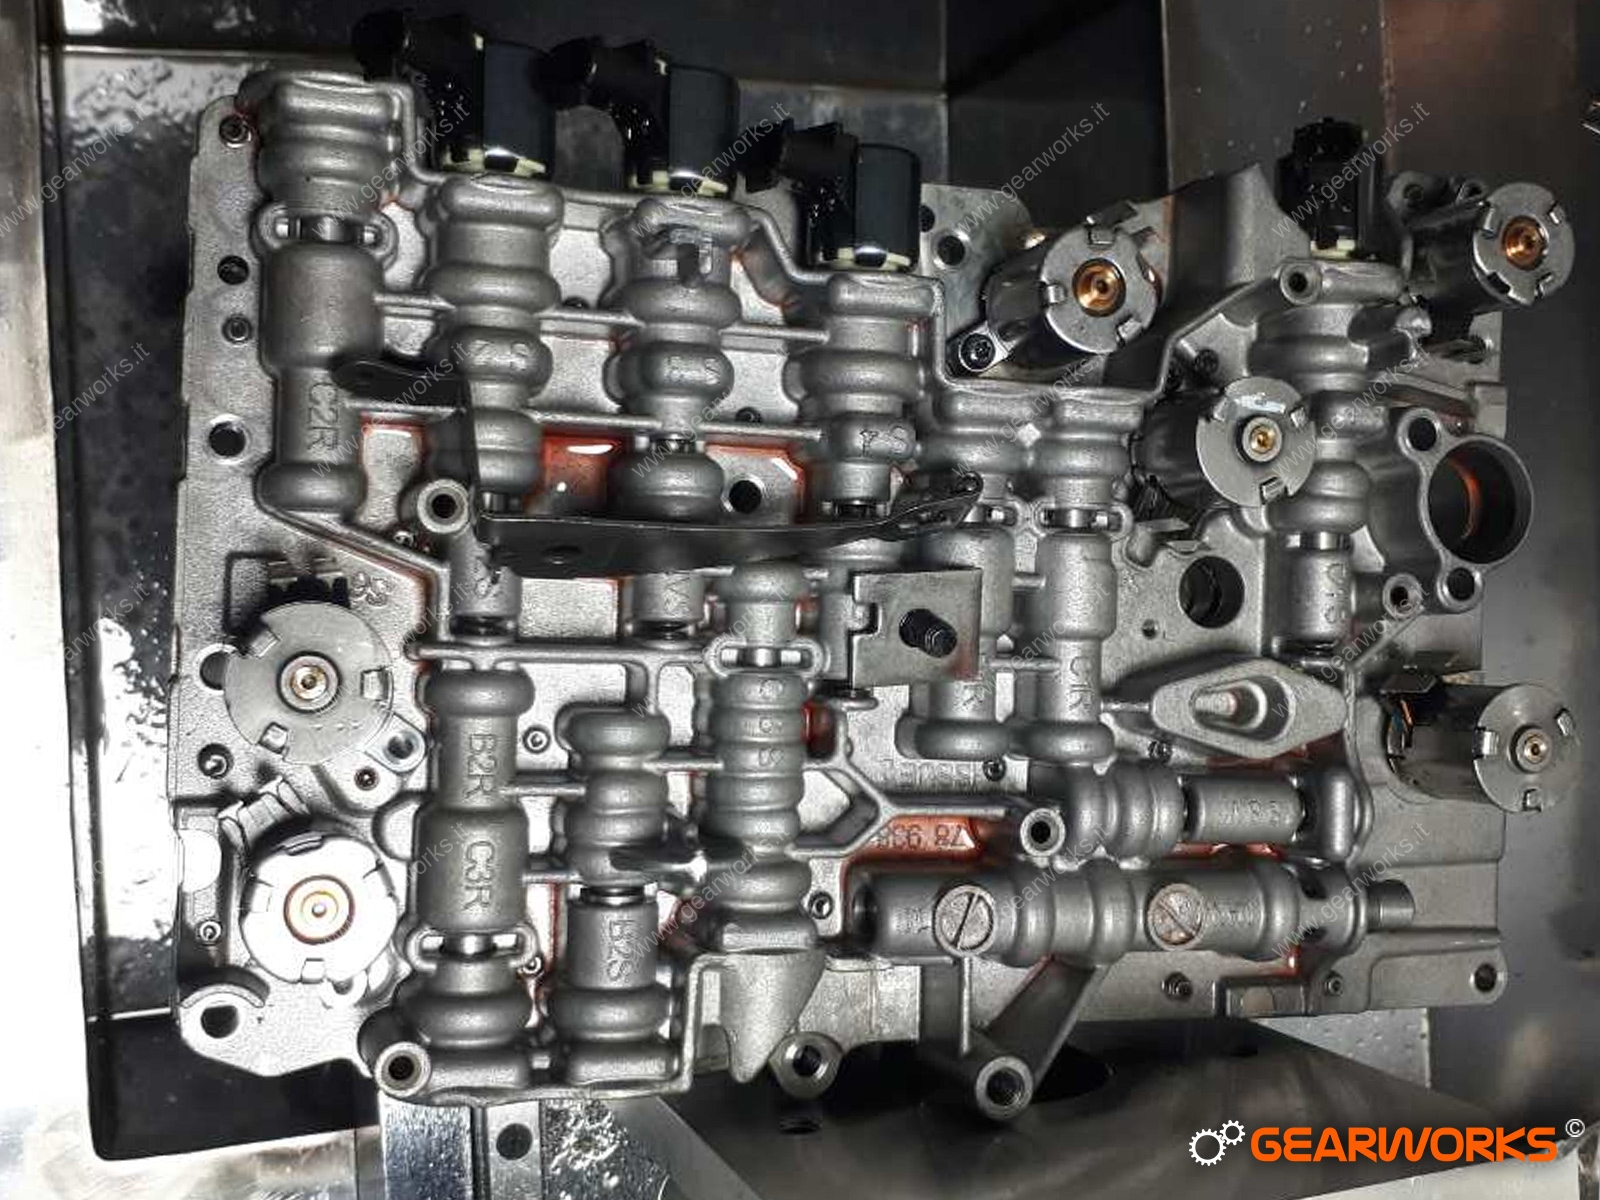 PROBLEMA CAMBIO SSANGYONG, M11 GEARBOX, PROBLEMA CAMBIO KORANDO, SSANGYONG KORANDO, COLPI CAMBIO KORANDO, CAMBIO ROTTO KORANDO, PROBLEMA KORANDO, RIPARAZIONE CAMBIO KORANDO, BERGAMO, REVISIONE CAMBI, P071F KORANDO, P0731 KORANDO, P0732 KORANDO, P0733 KORANDO